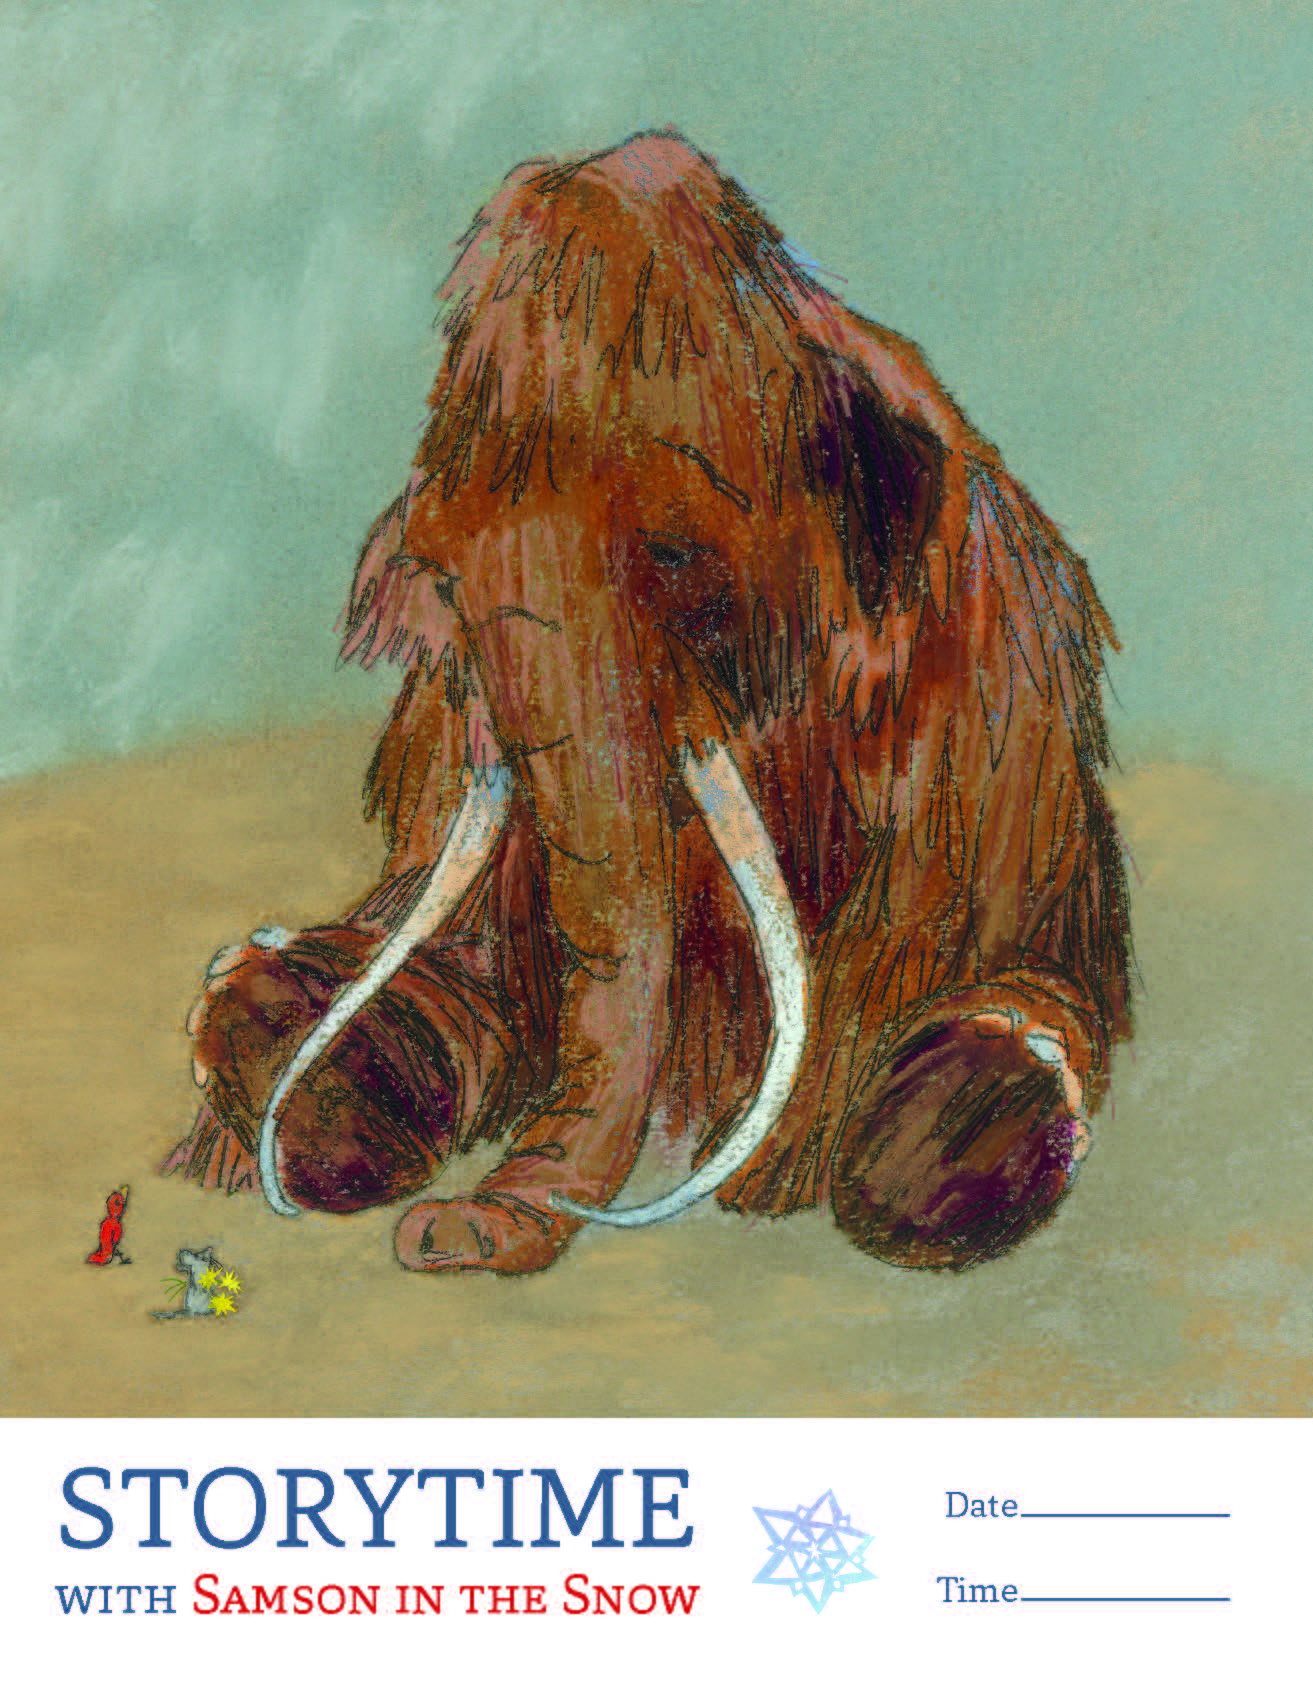 samson-in-the-snow-storytime-sign-1